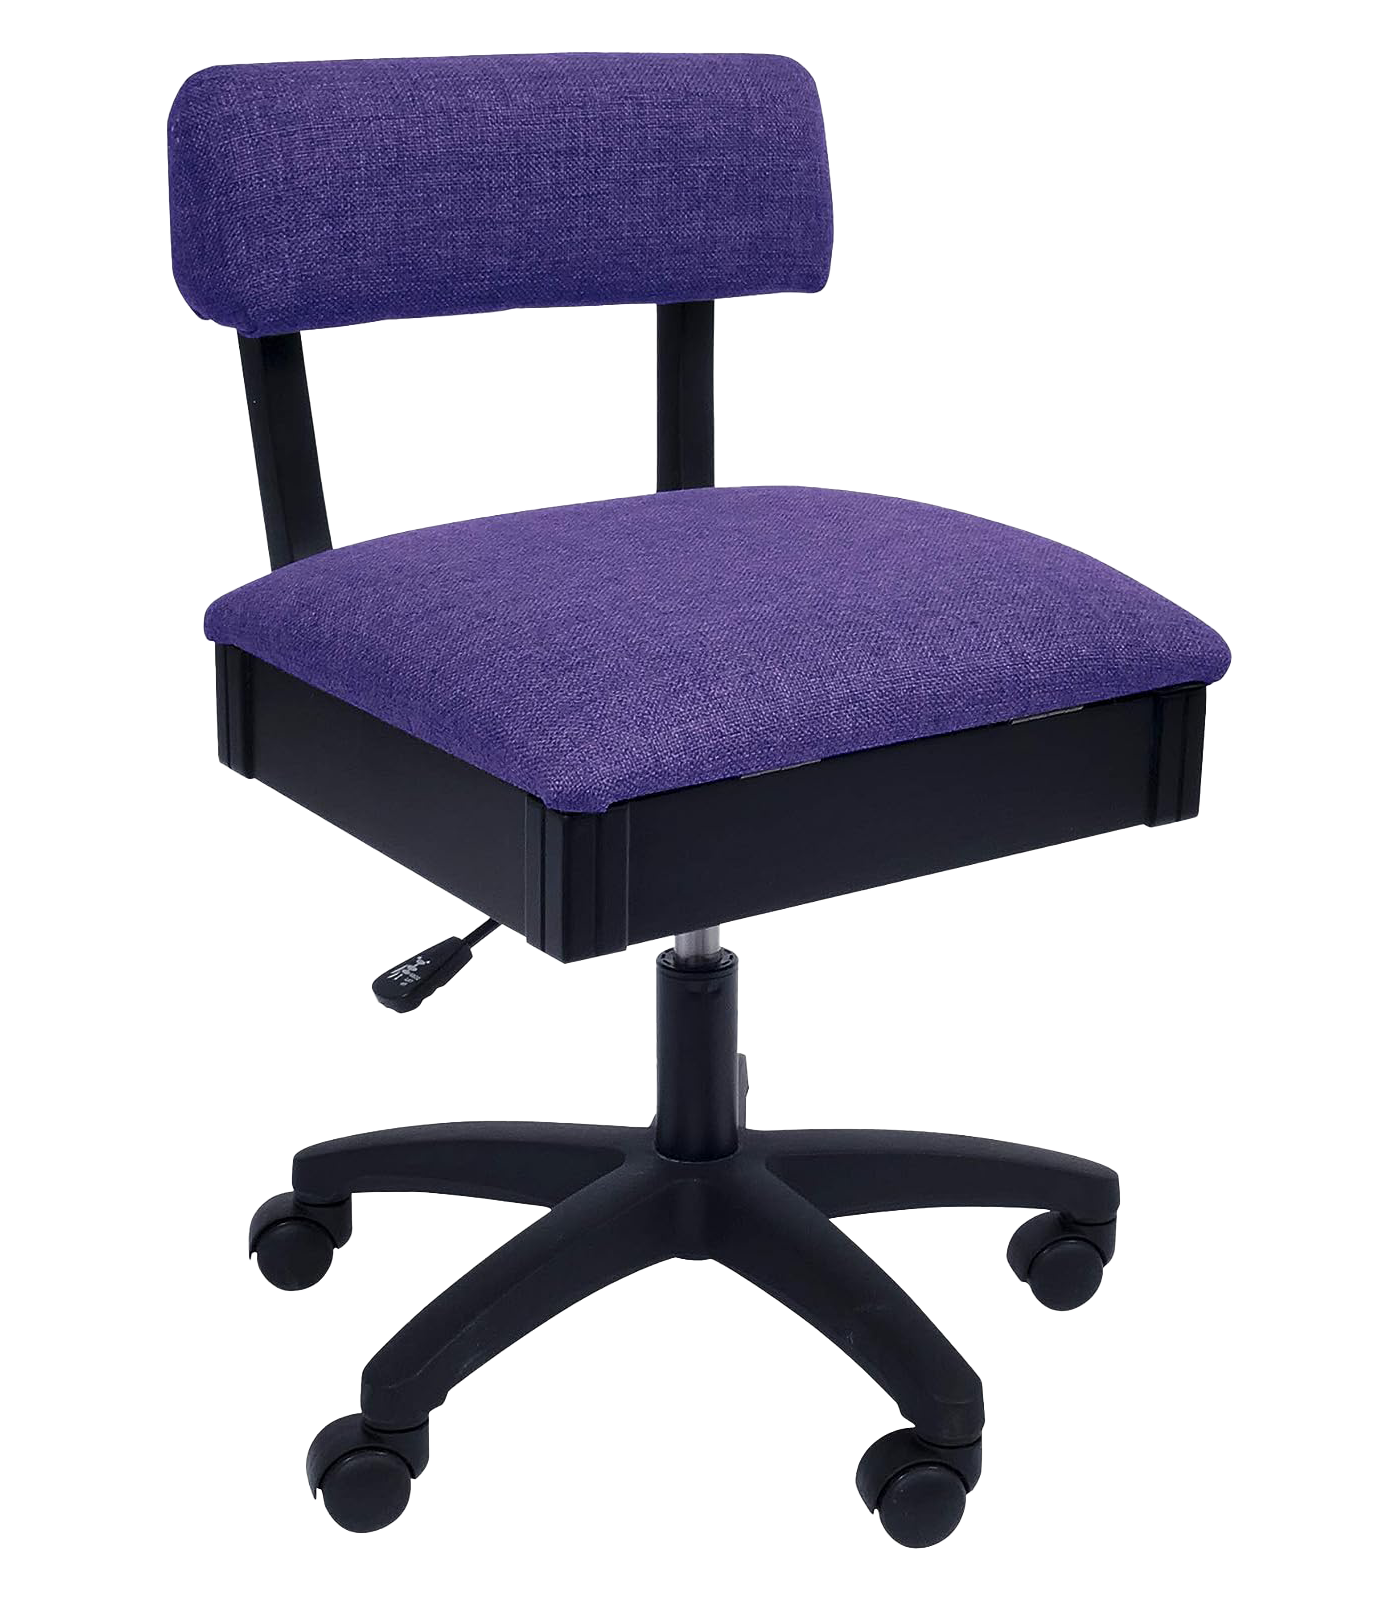 Arrow Sewing Height Adjustable Hydraulic Sewing Chair H160 Royal Purple for Sale at World Weidner